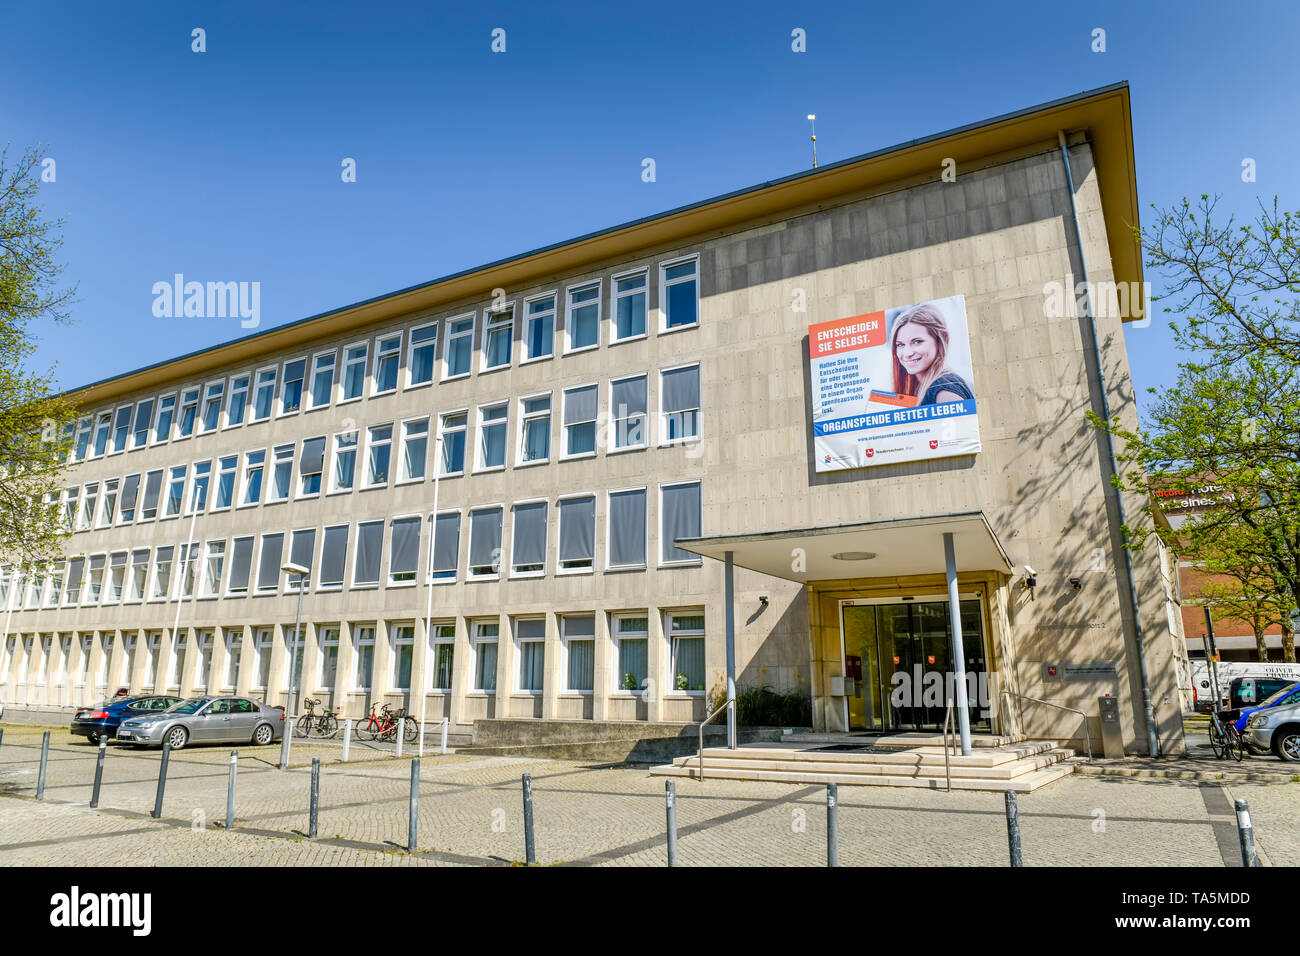 Ministry from Lower Saxony of social, health and equalization, Hannah Arendt place, Hannover, Lower Saxony, Germany, Niedersächsisches Ministerium für Stock Photo